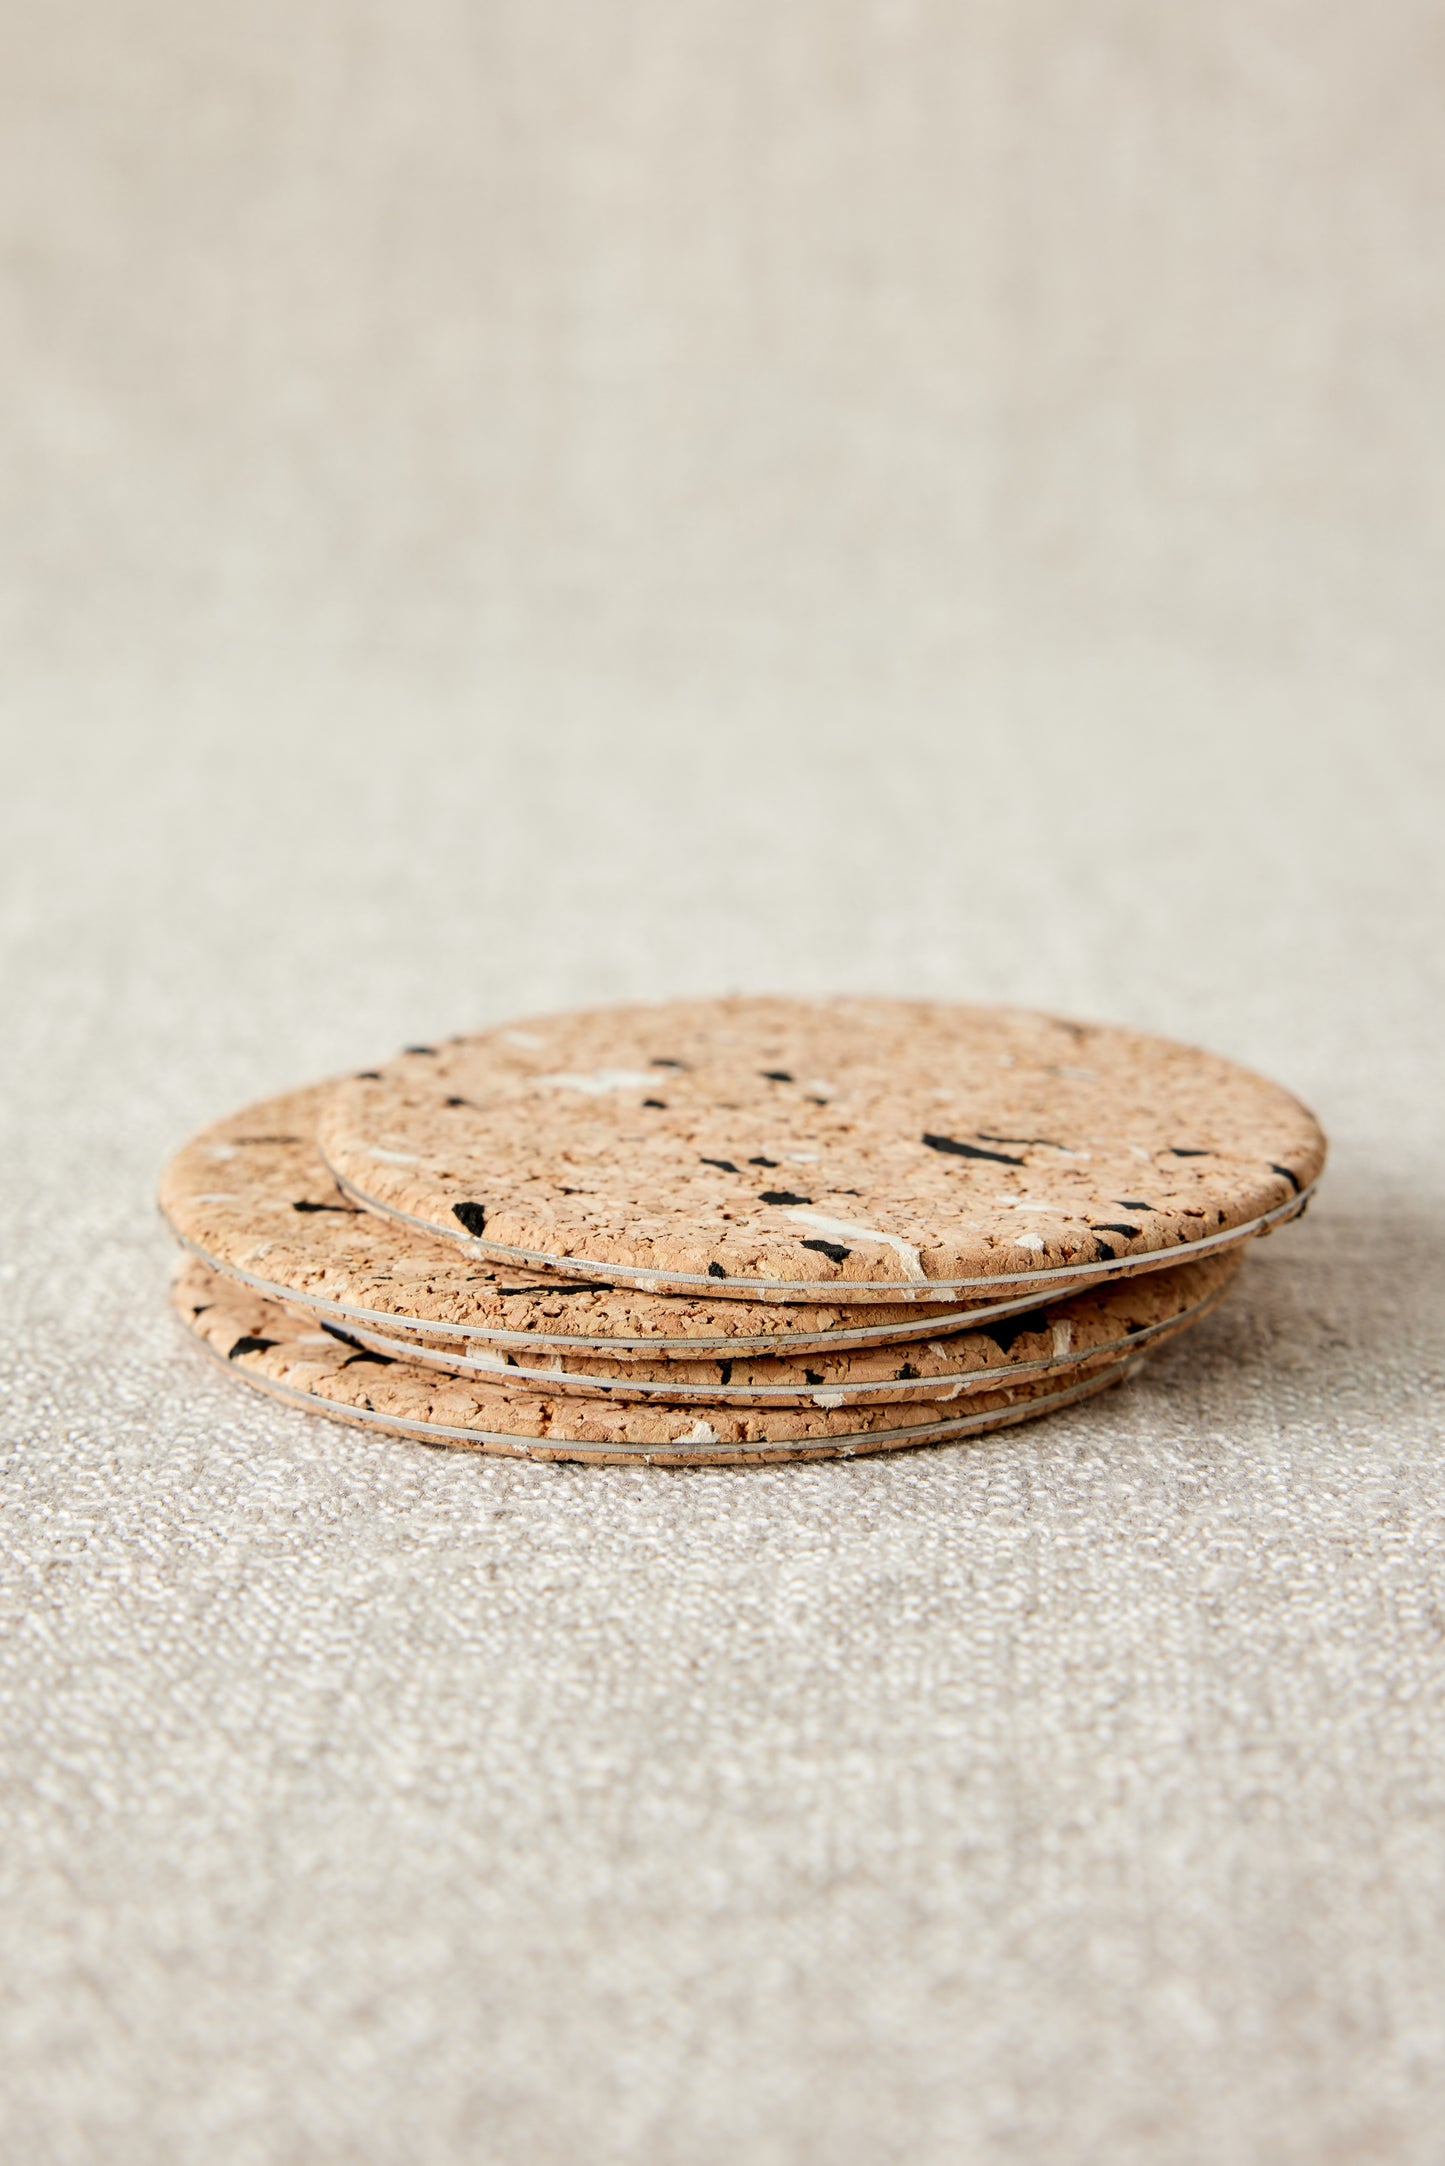 Wiid Black & White Speckled Cork Coasters - Set of 4